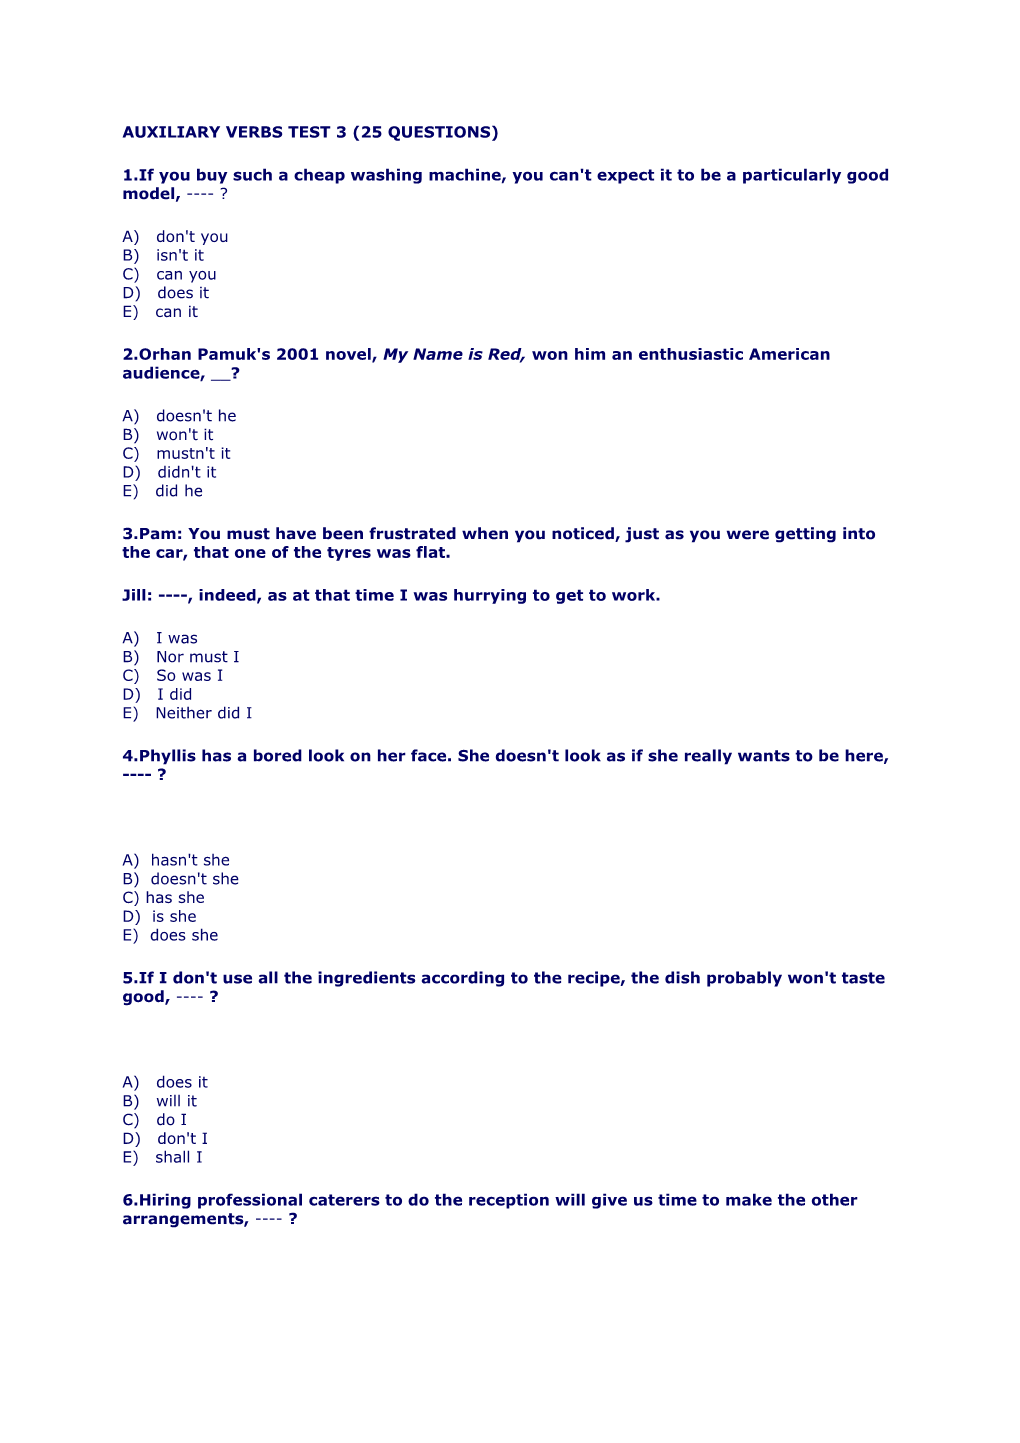 Auxiliary Verbs Test 3 (25 Questions)